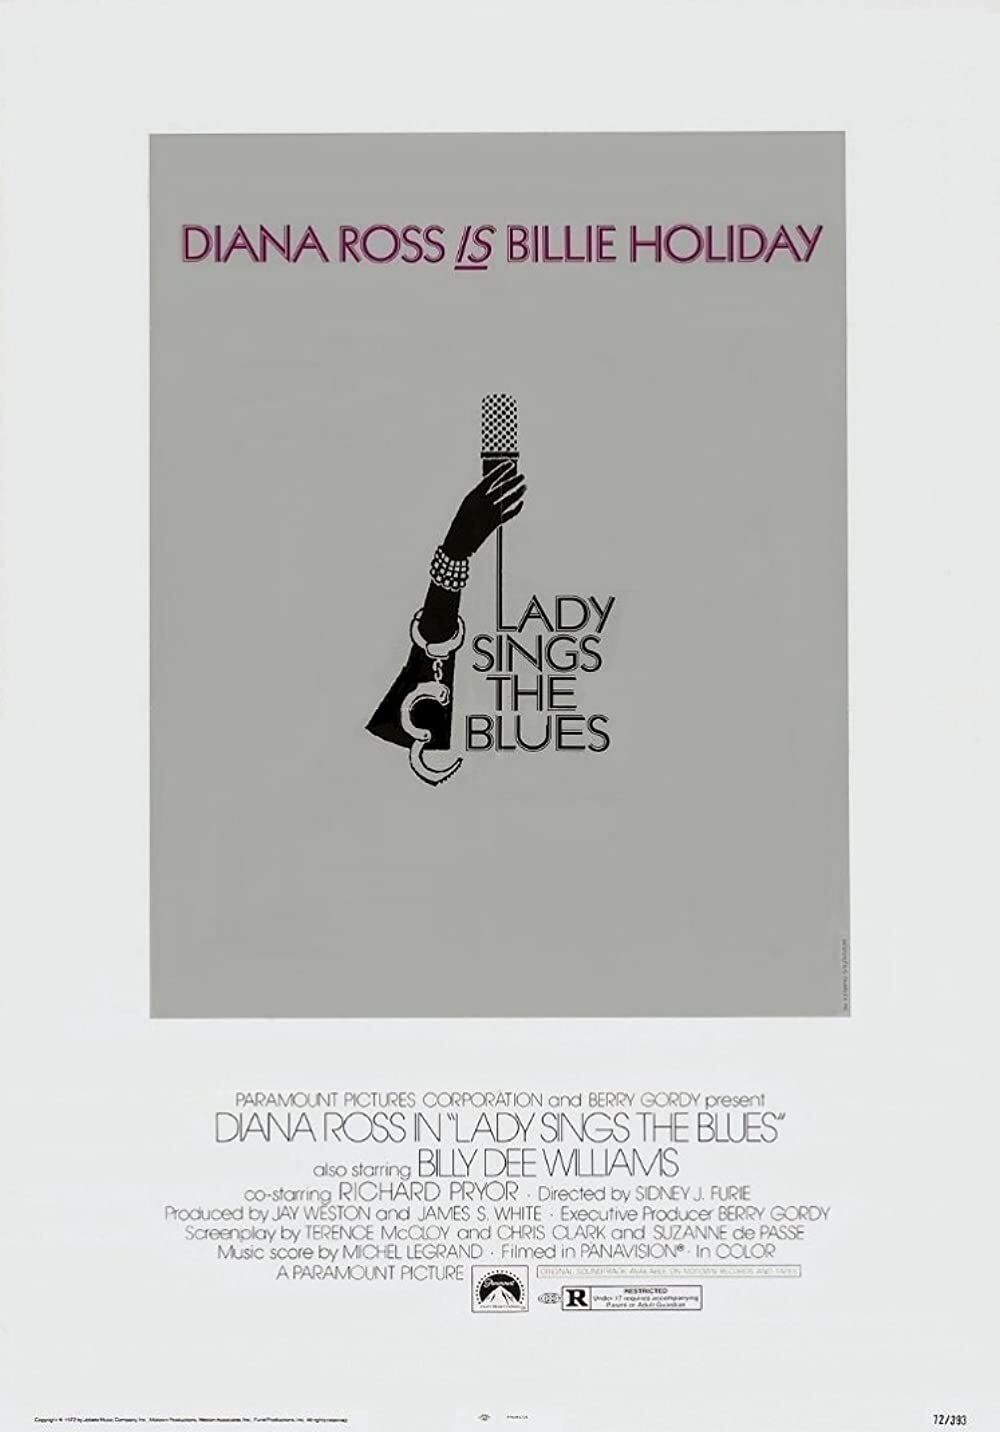 Diana Does Billie: Lady Sings the Blues at 50